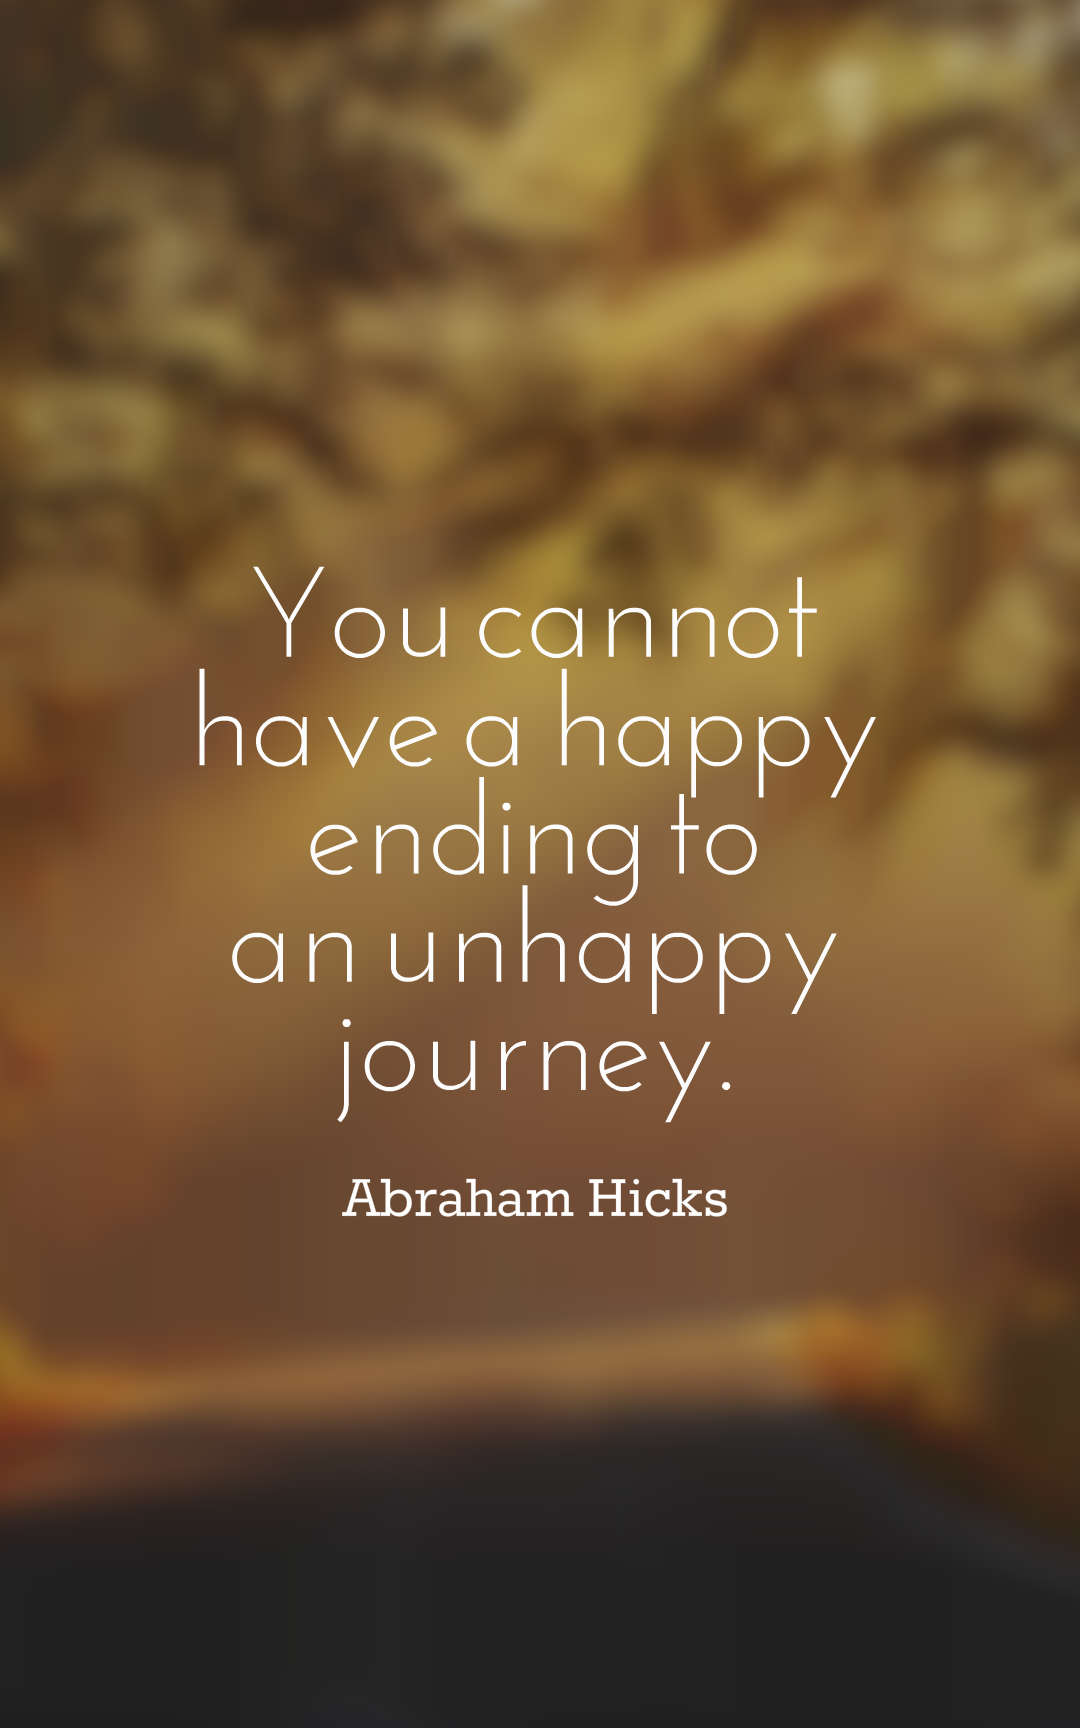 You cannot have a happy ending to an unhappy journey.